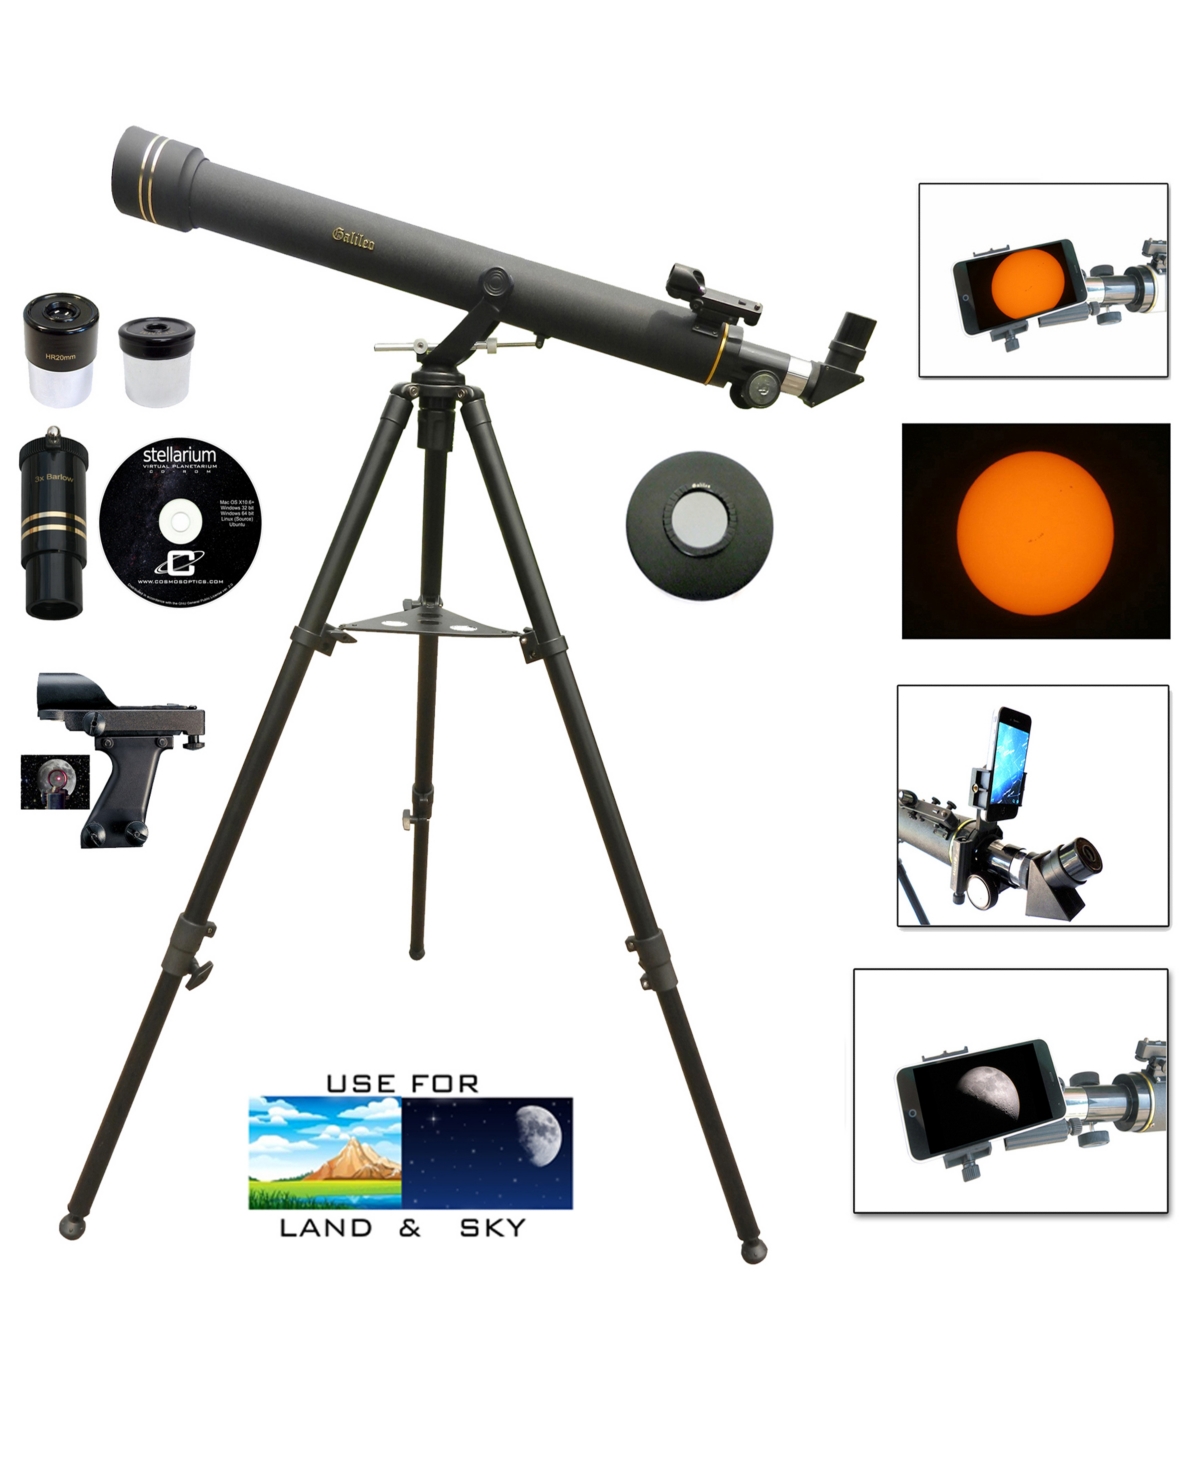 Galileo 800mm X 72mm Day And Night Refractor Telescope Kit With Solar Filter Caps In Black